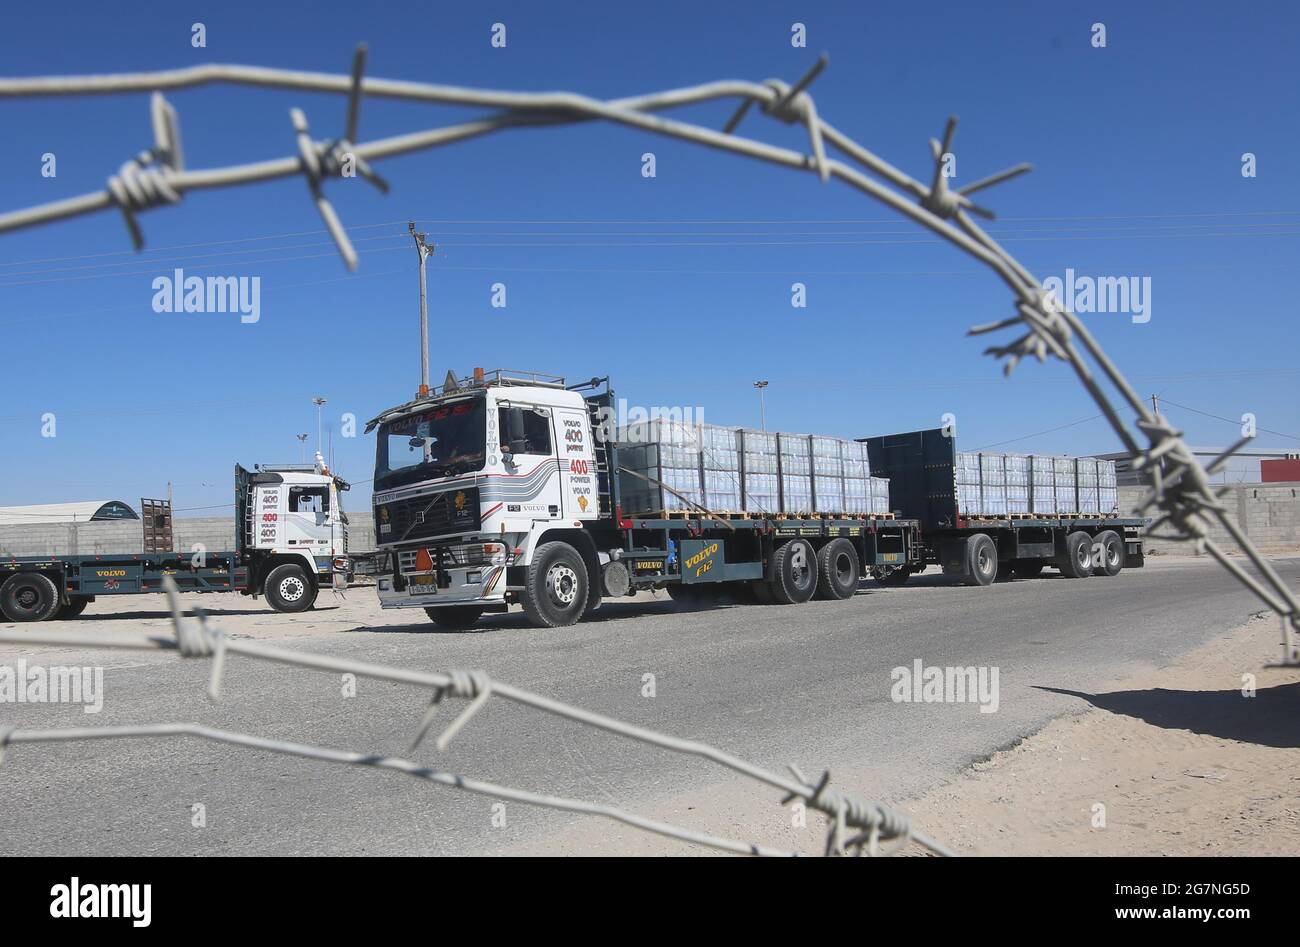 Rafah. 14th July, 2021. A loaded trailer truck arrives at the Kerem Shalom commercial crossing in the southern Gaza Strip city of Rafah, July 14, 2021. Israel on Monday decided to ease the tight restrictions imposed two months ago on export, import and fishing in the Gaza Strip, Palestinian officials said. The import of medical supplies and raw materials for industry and textiles will be allowed from Israel to Gaza through the commercial crossing of Kerem Shalom. Credit: Khaled Omar/Xinhua/Alamy Live News Stock Photo